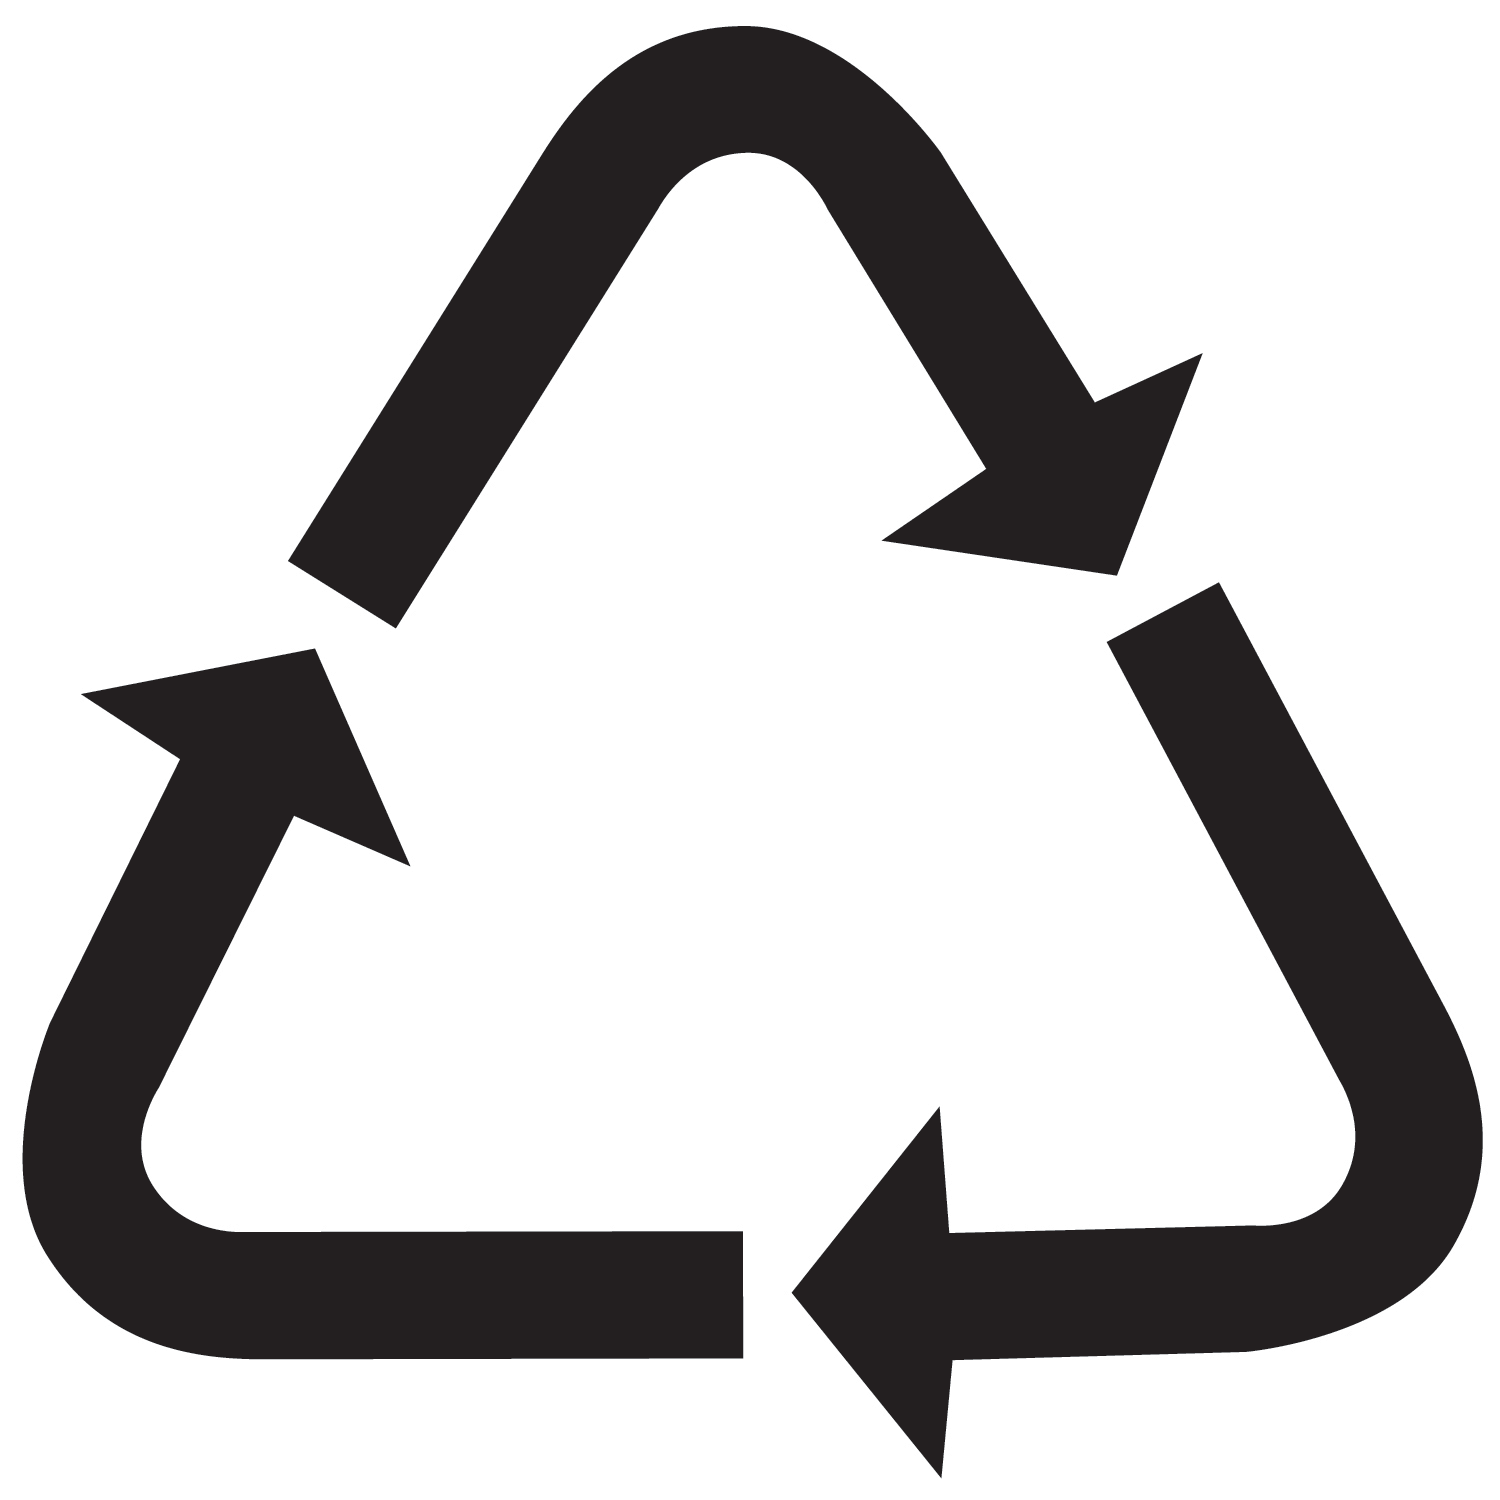 Recycle Logo - Free Recycling Symbol Printable, Download Free Clip Art, Free Clip